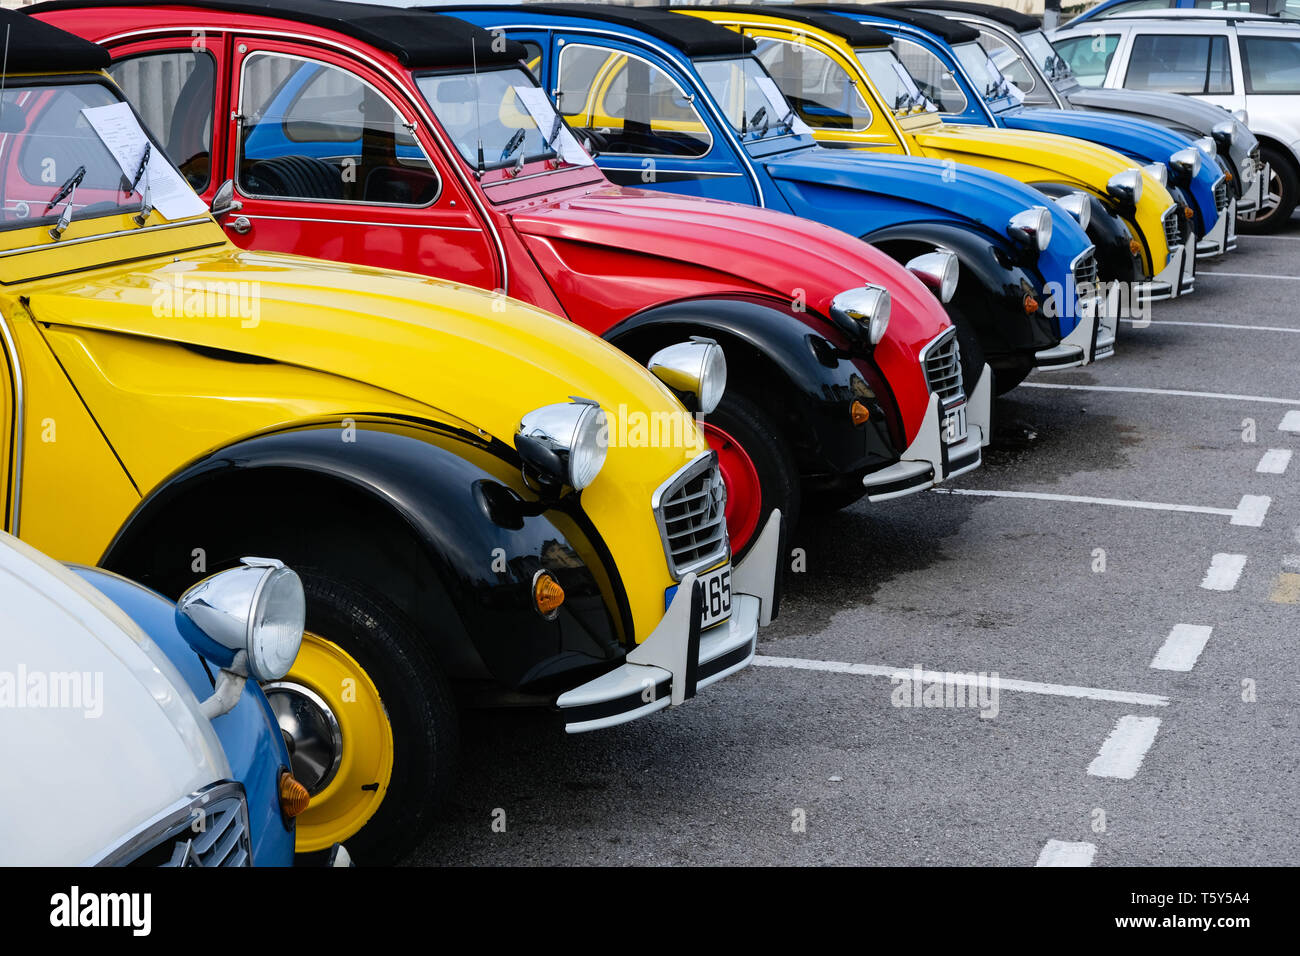 Classic Citreon 2CV motor cars for hire in Biarritz, southern France.  Credit: Gareth Llewelyn/Alamy Stock Photo